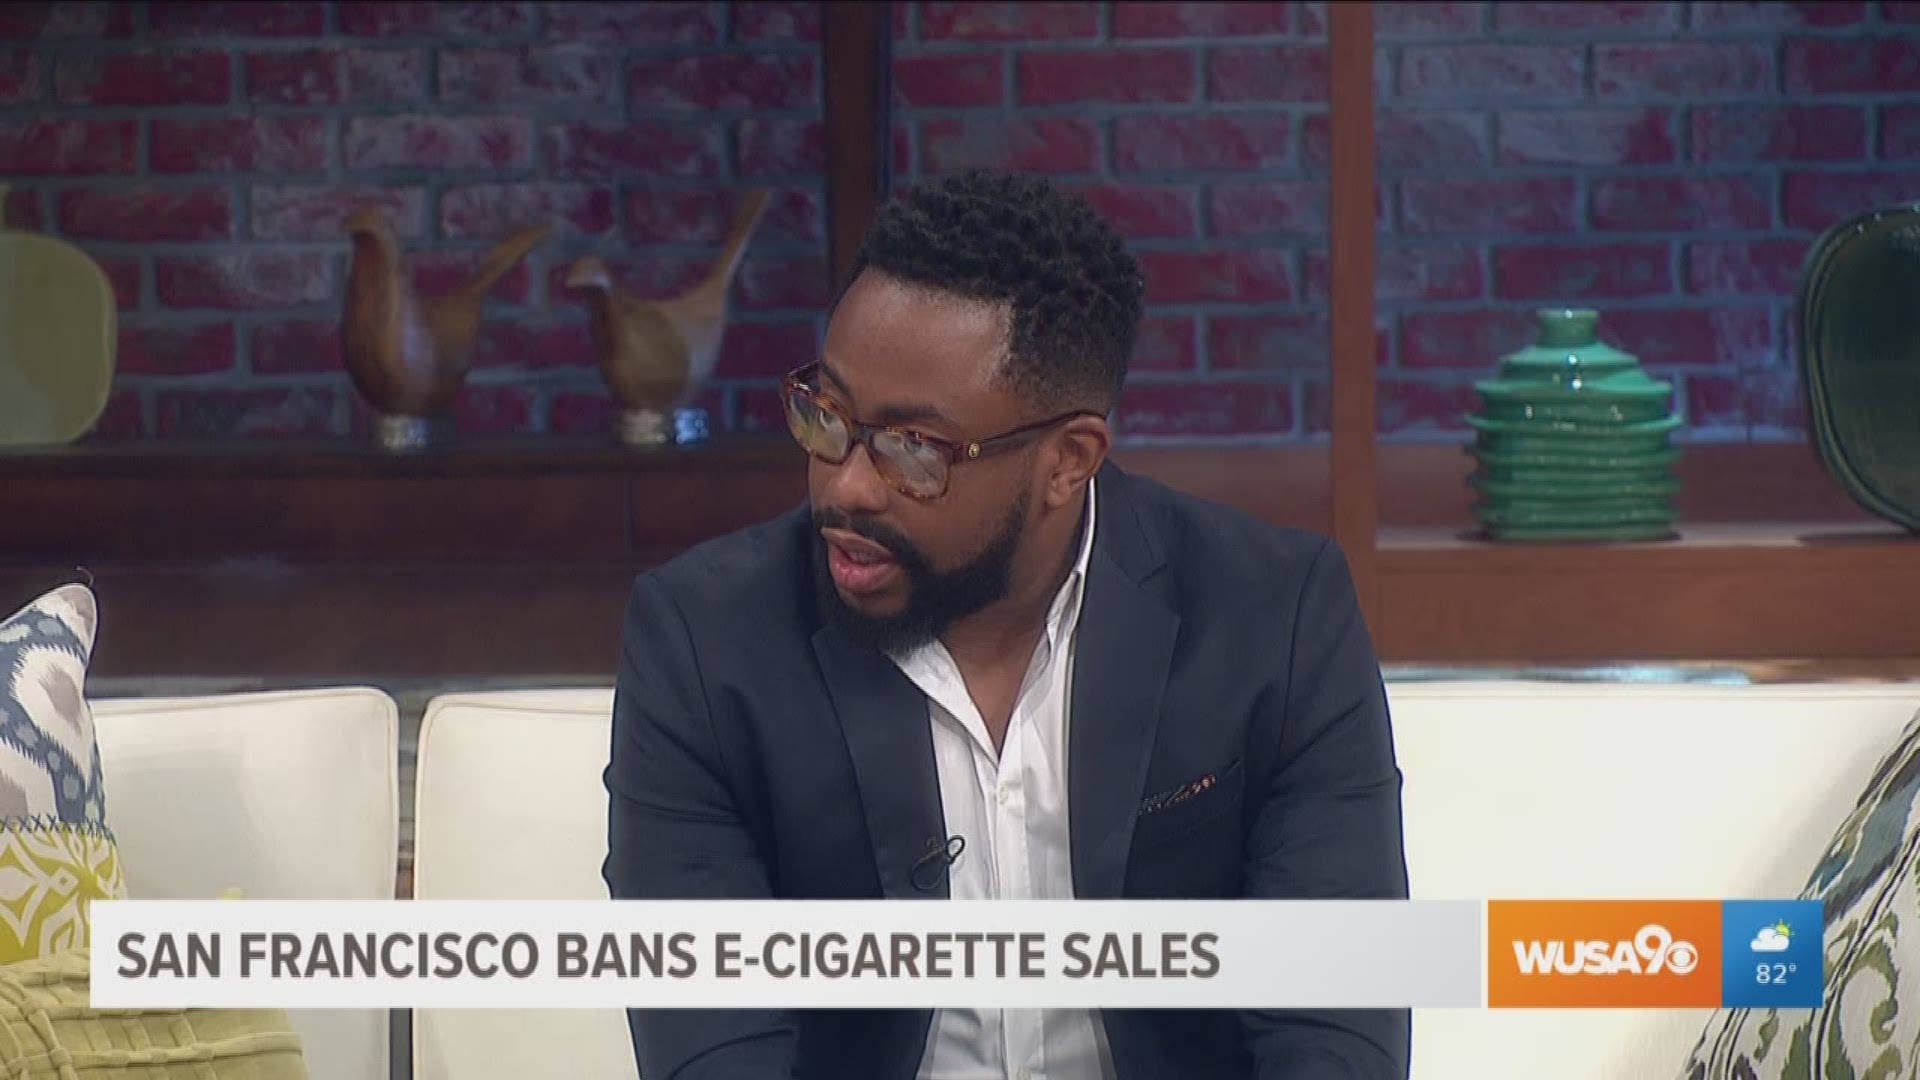 Raheem Devaughn joins Markette and Kristen on the couch to talk about the legalization of marijuana in Illinois and the e-cigarette ban in San Fransisco.